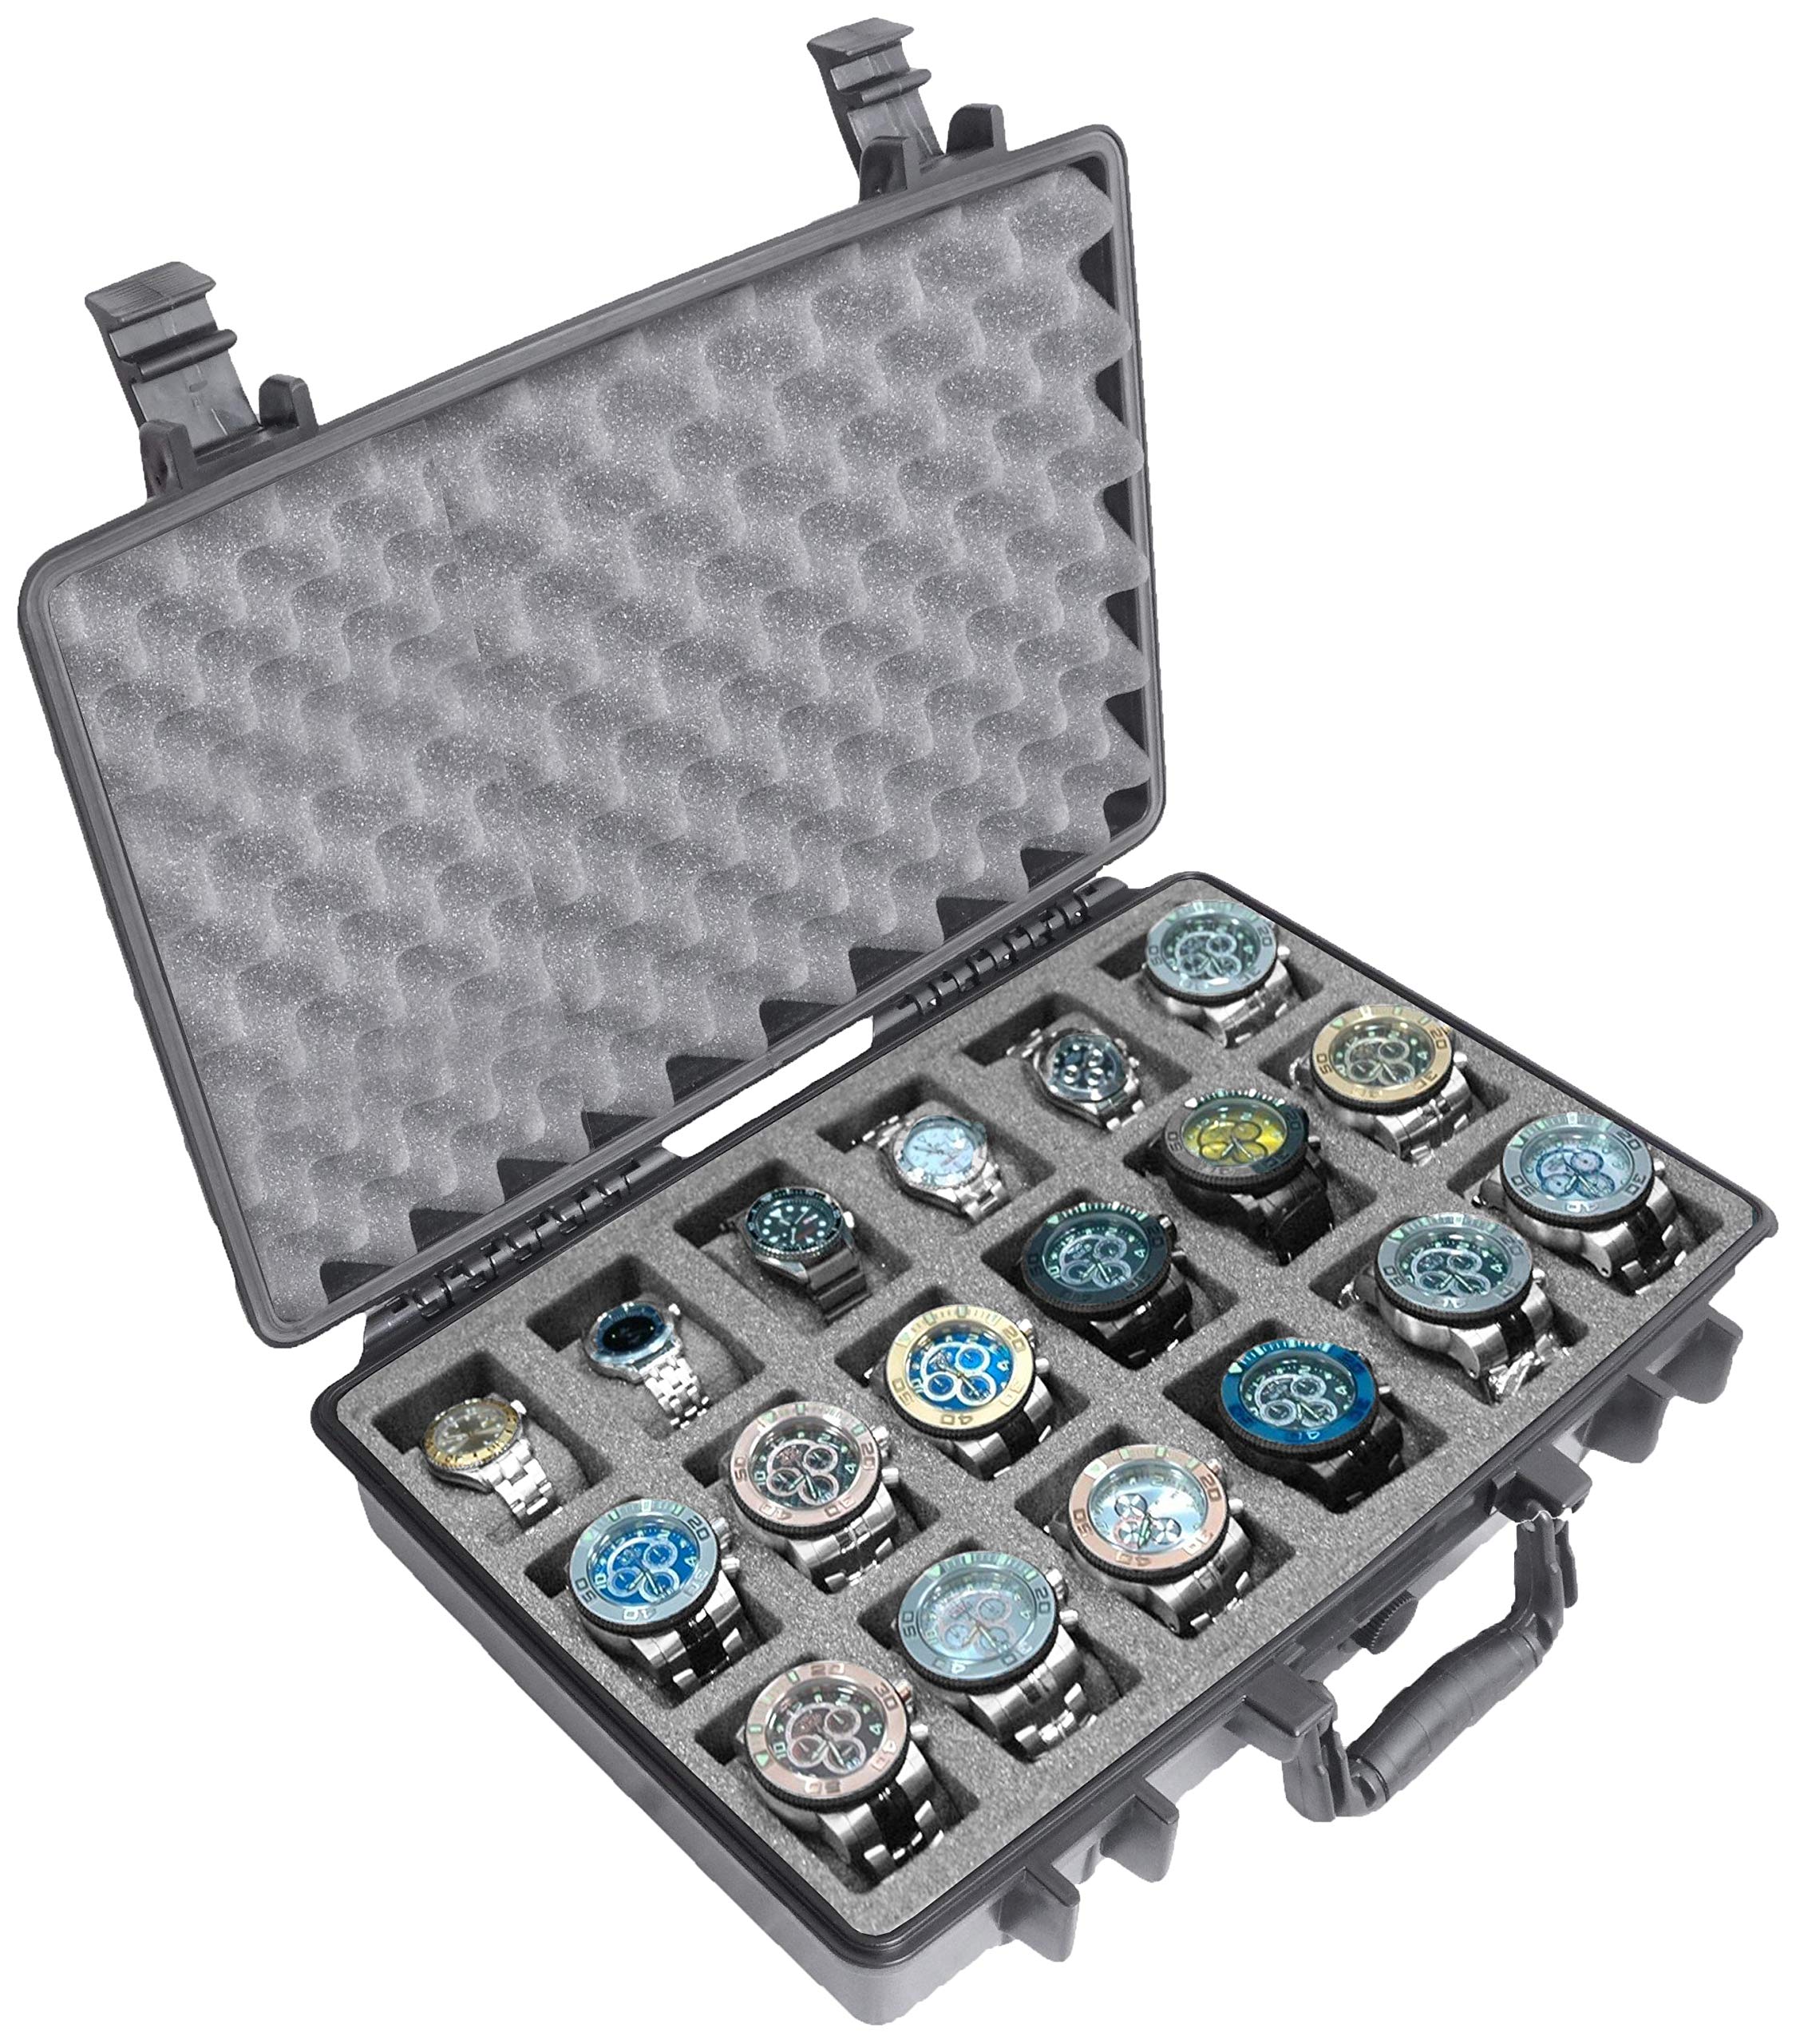 Case Club 18 Watch Carry Case - Organize & Protect Your Watch Collection in a Hard Shell, Heavy Duty, Waterproof, Travel & Storage Case - For Men's & Women's Watches of Various Sizes